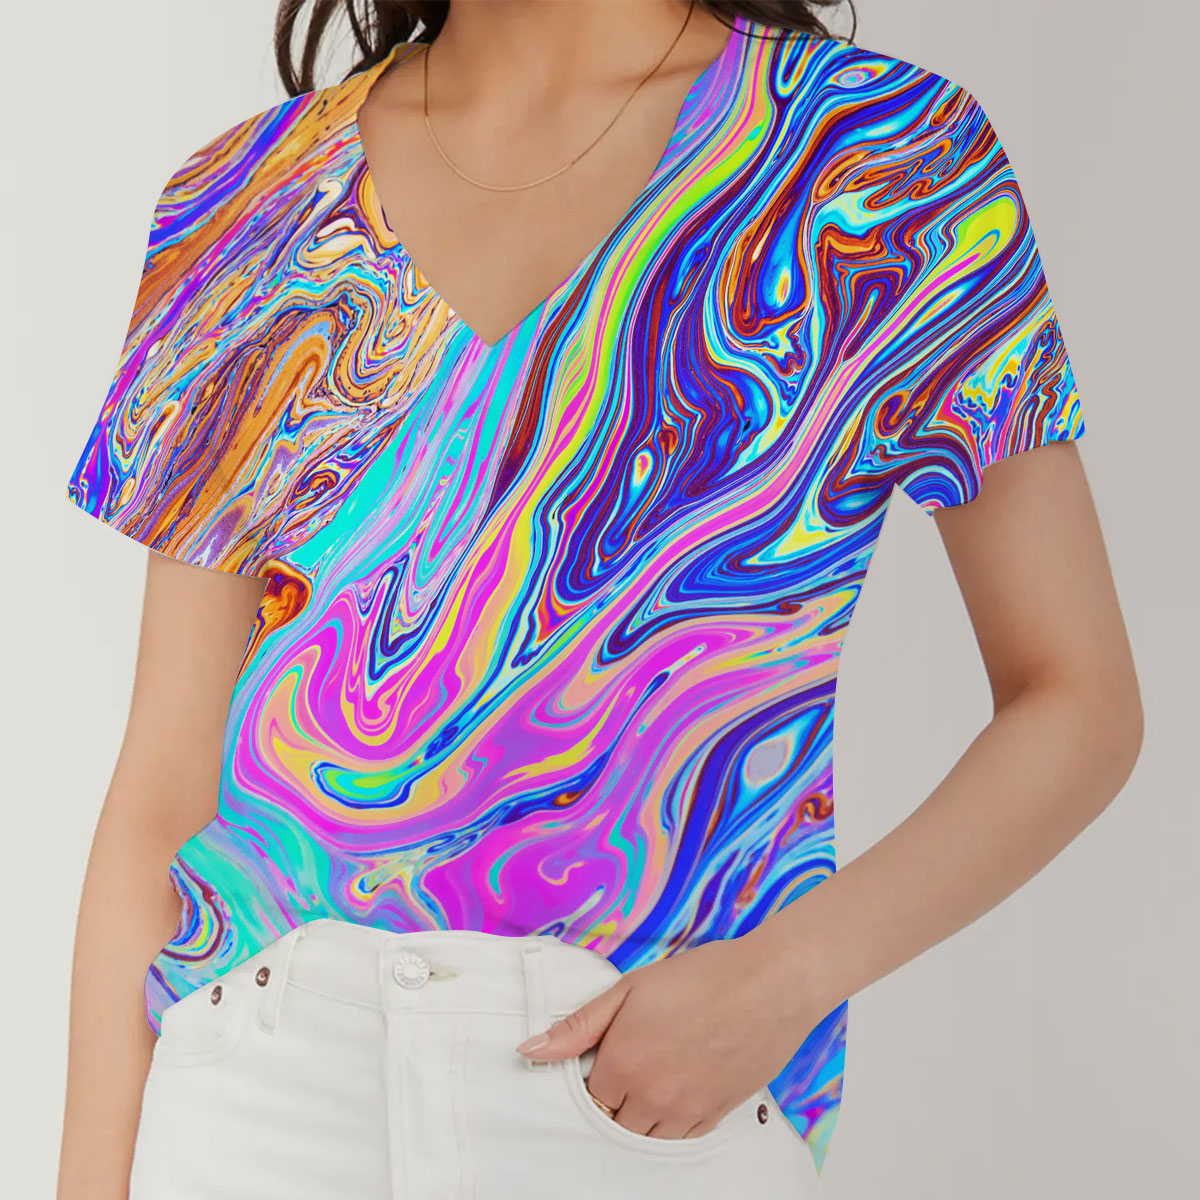 Colorful Psychedelic V-Neck Women's T-Shirt_1_2.1